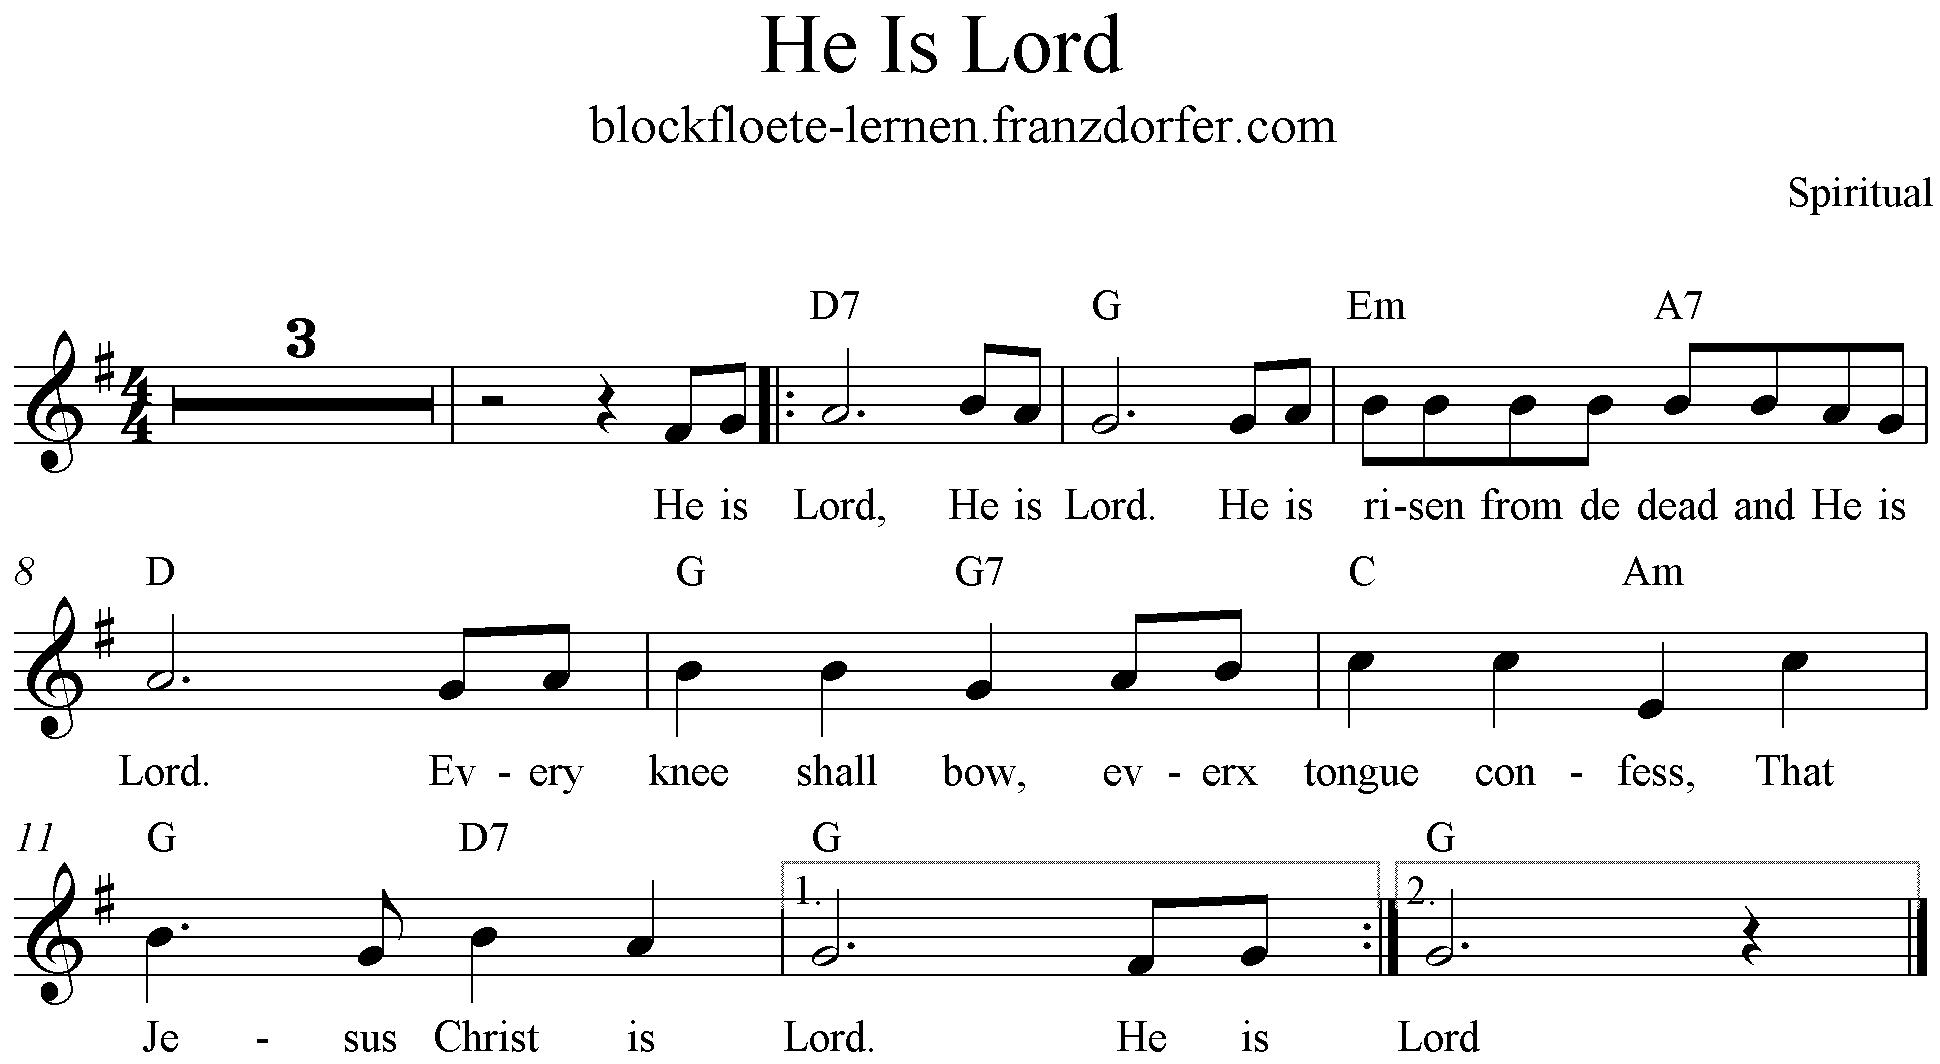 He Is Lord, G-Major, high